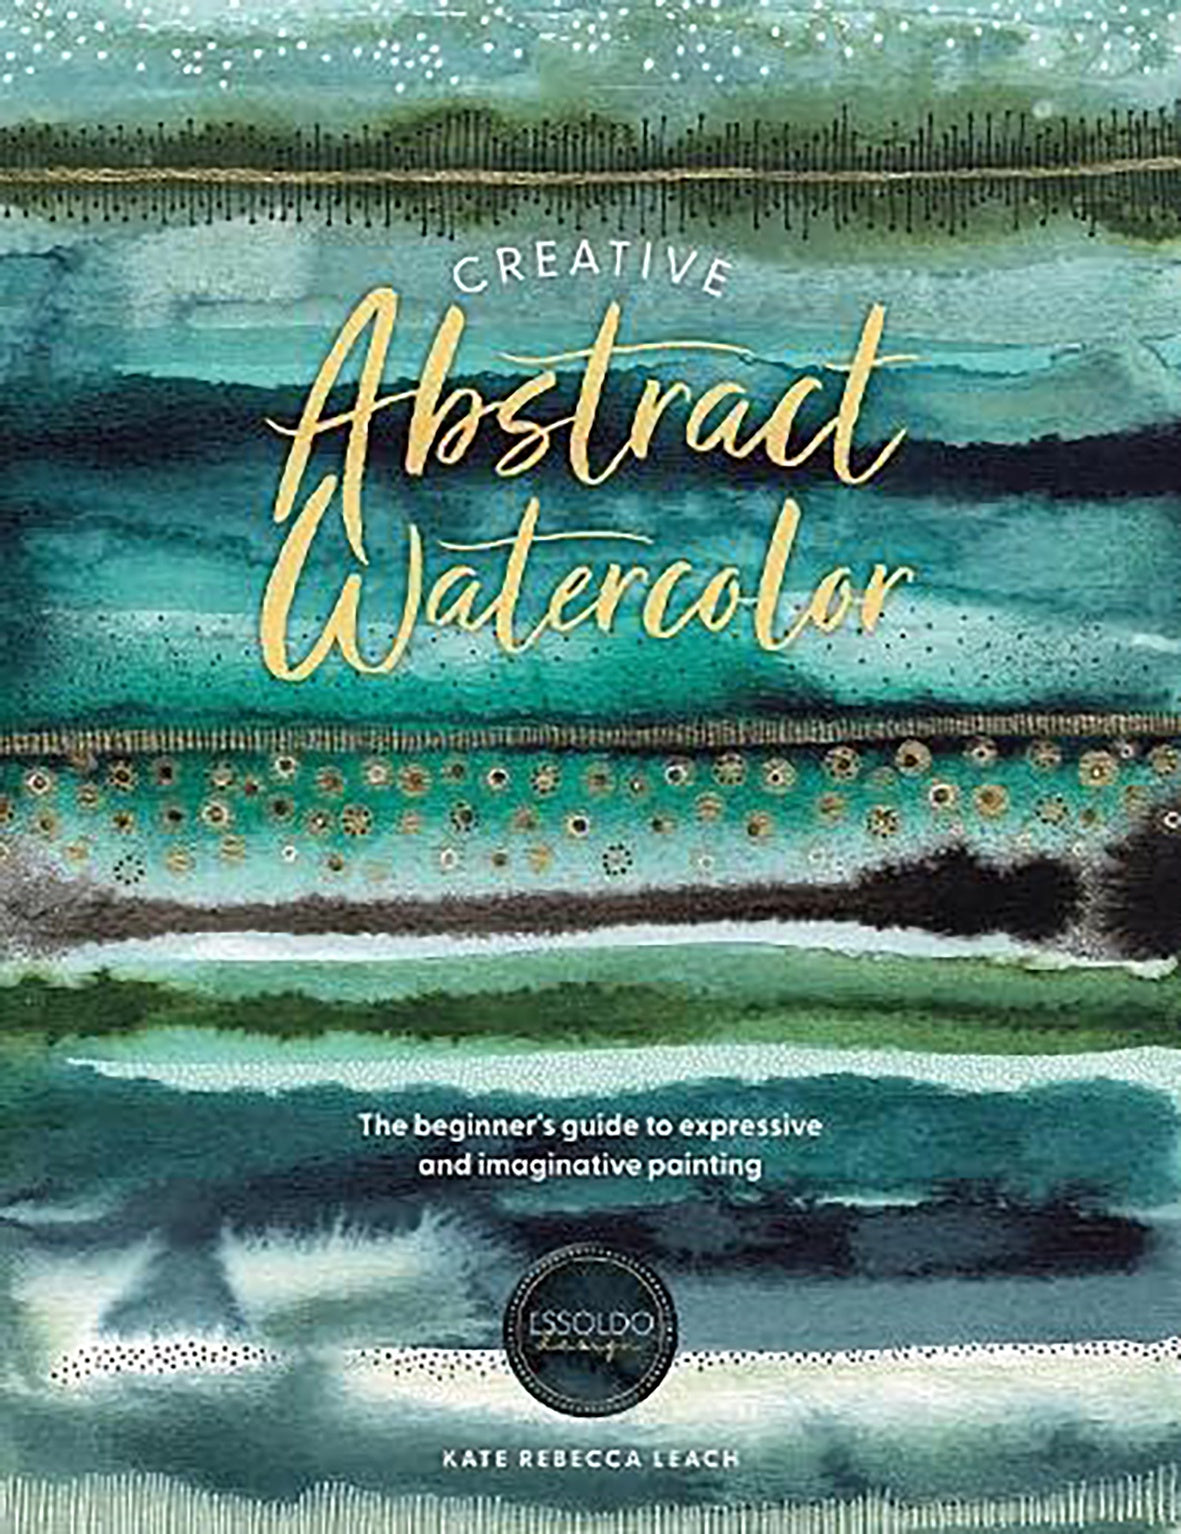 Creative Abstract Watercolor £16.99 The Beginner's guide to expressive and imaginative painting by Kate Rebecca Leach